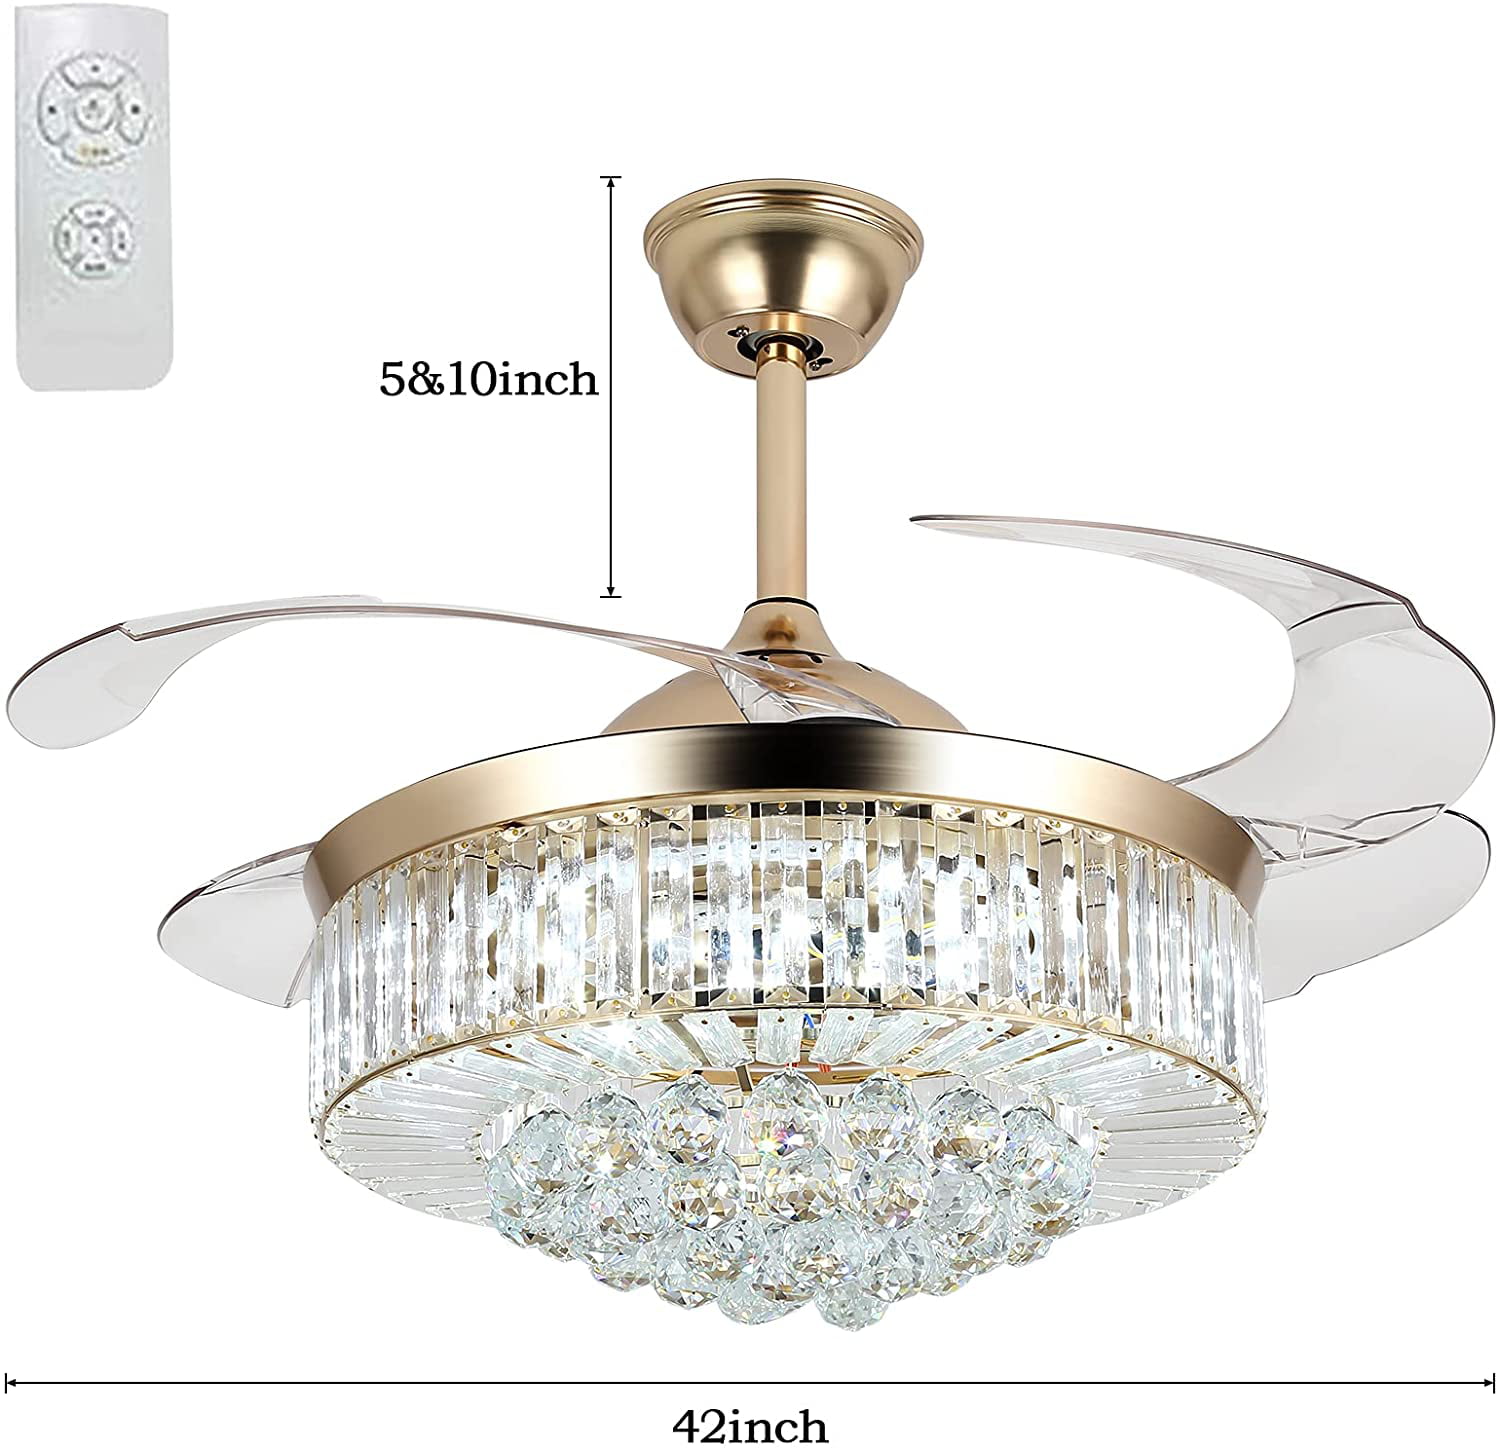 42" Chandelier Indoor Ceiling Fan Light Invisible 8 Blades LED Remote Control 